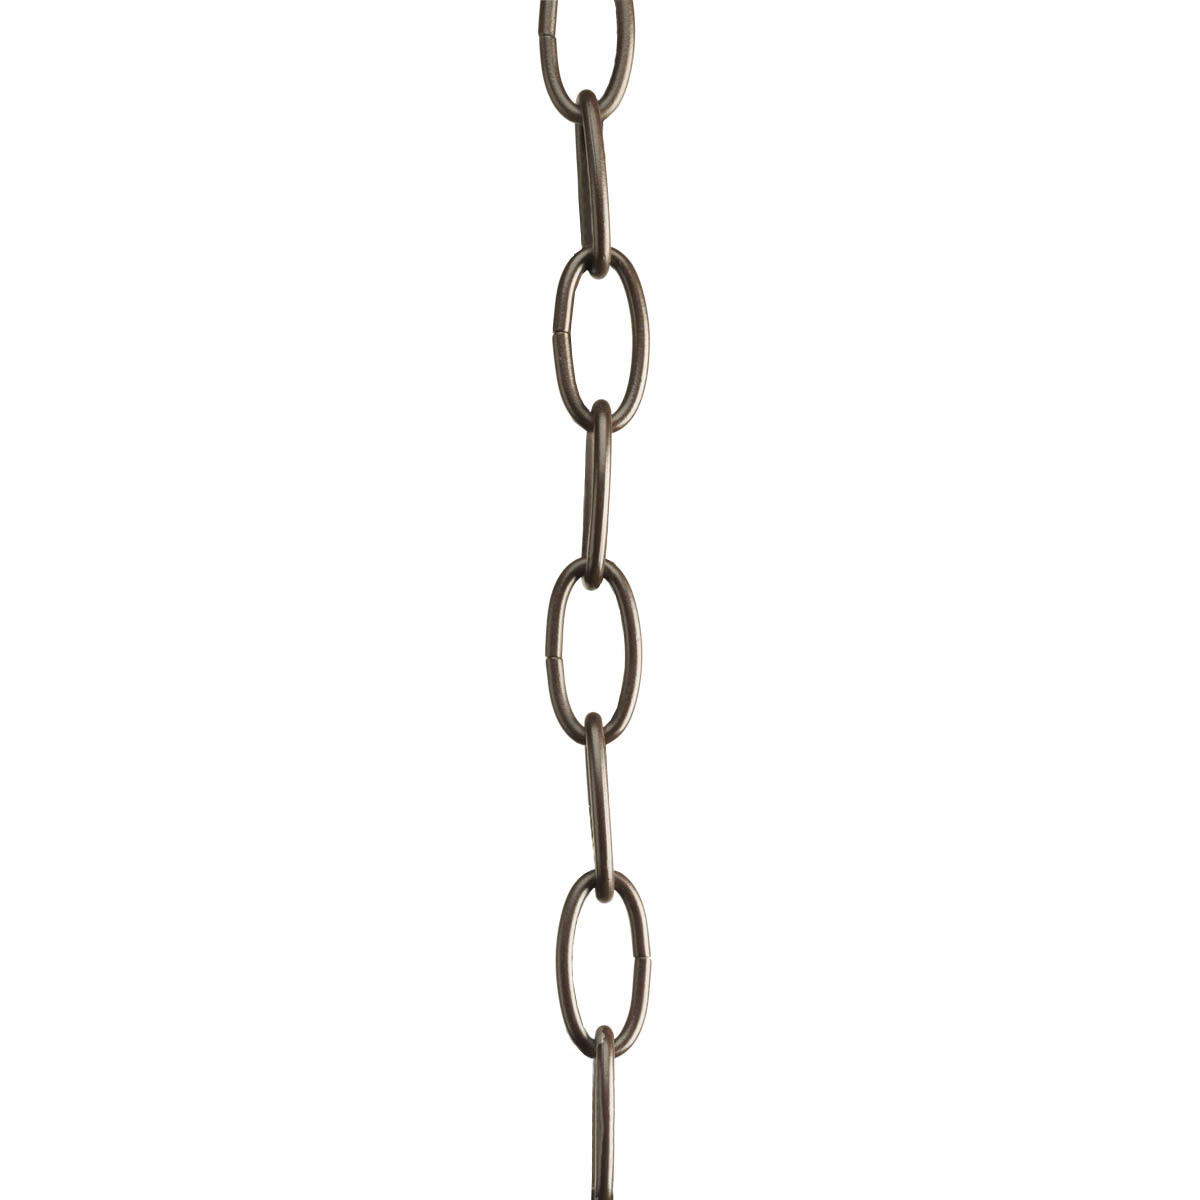 Ten feet of 9 gauge chain in Antique Bronze finish. Solid chain permits installation of chain-hung fixtures on high ceilings. Maximum fixture weight 50 lbs.